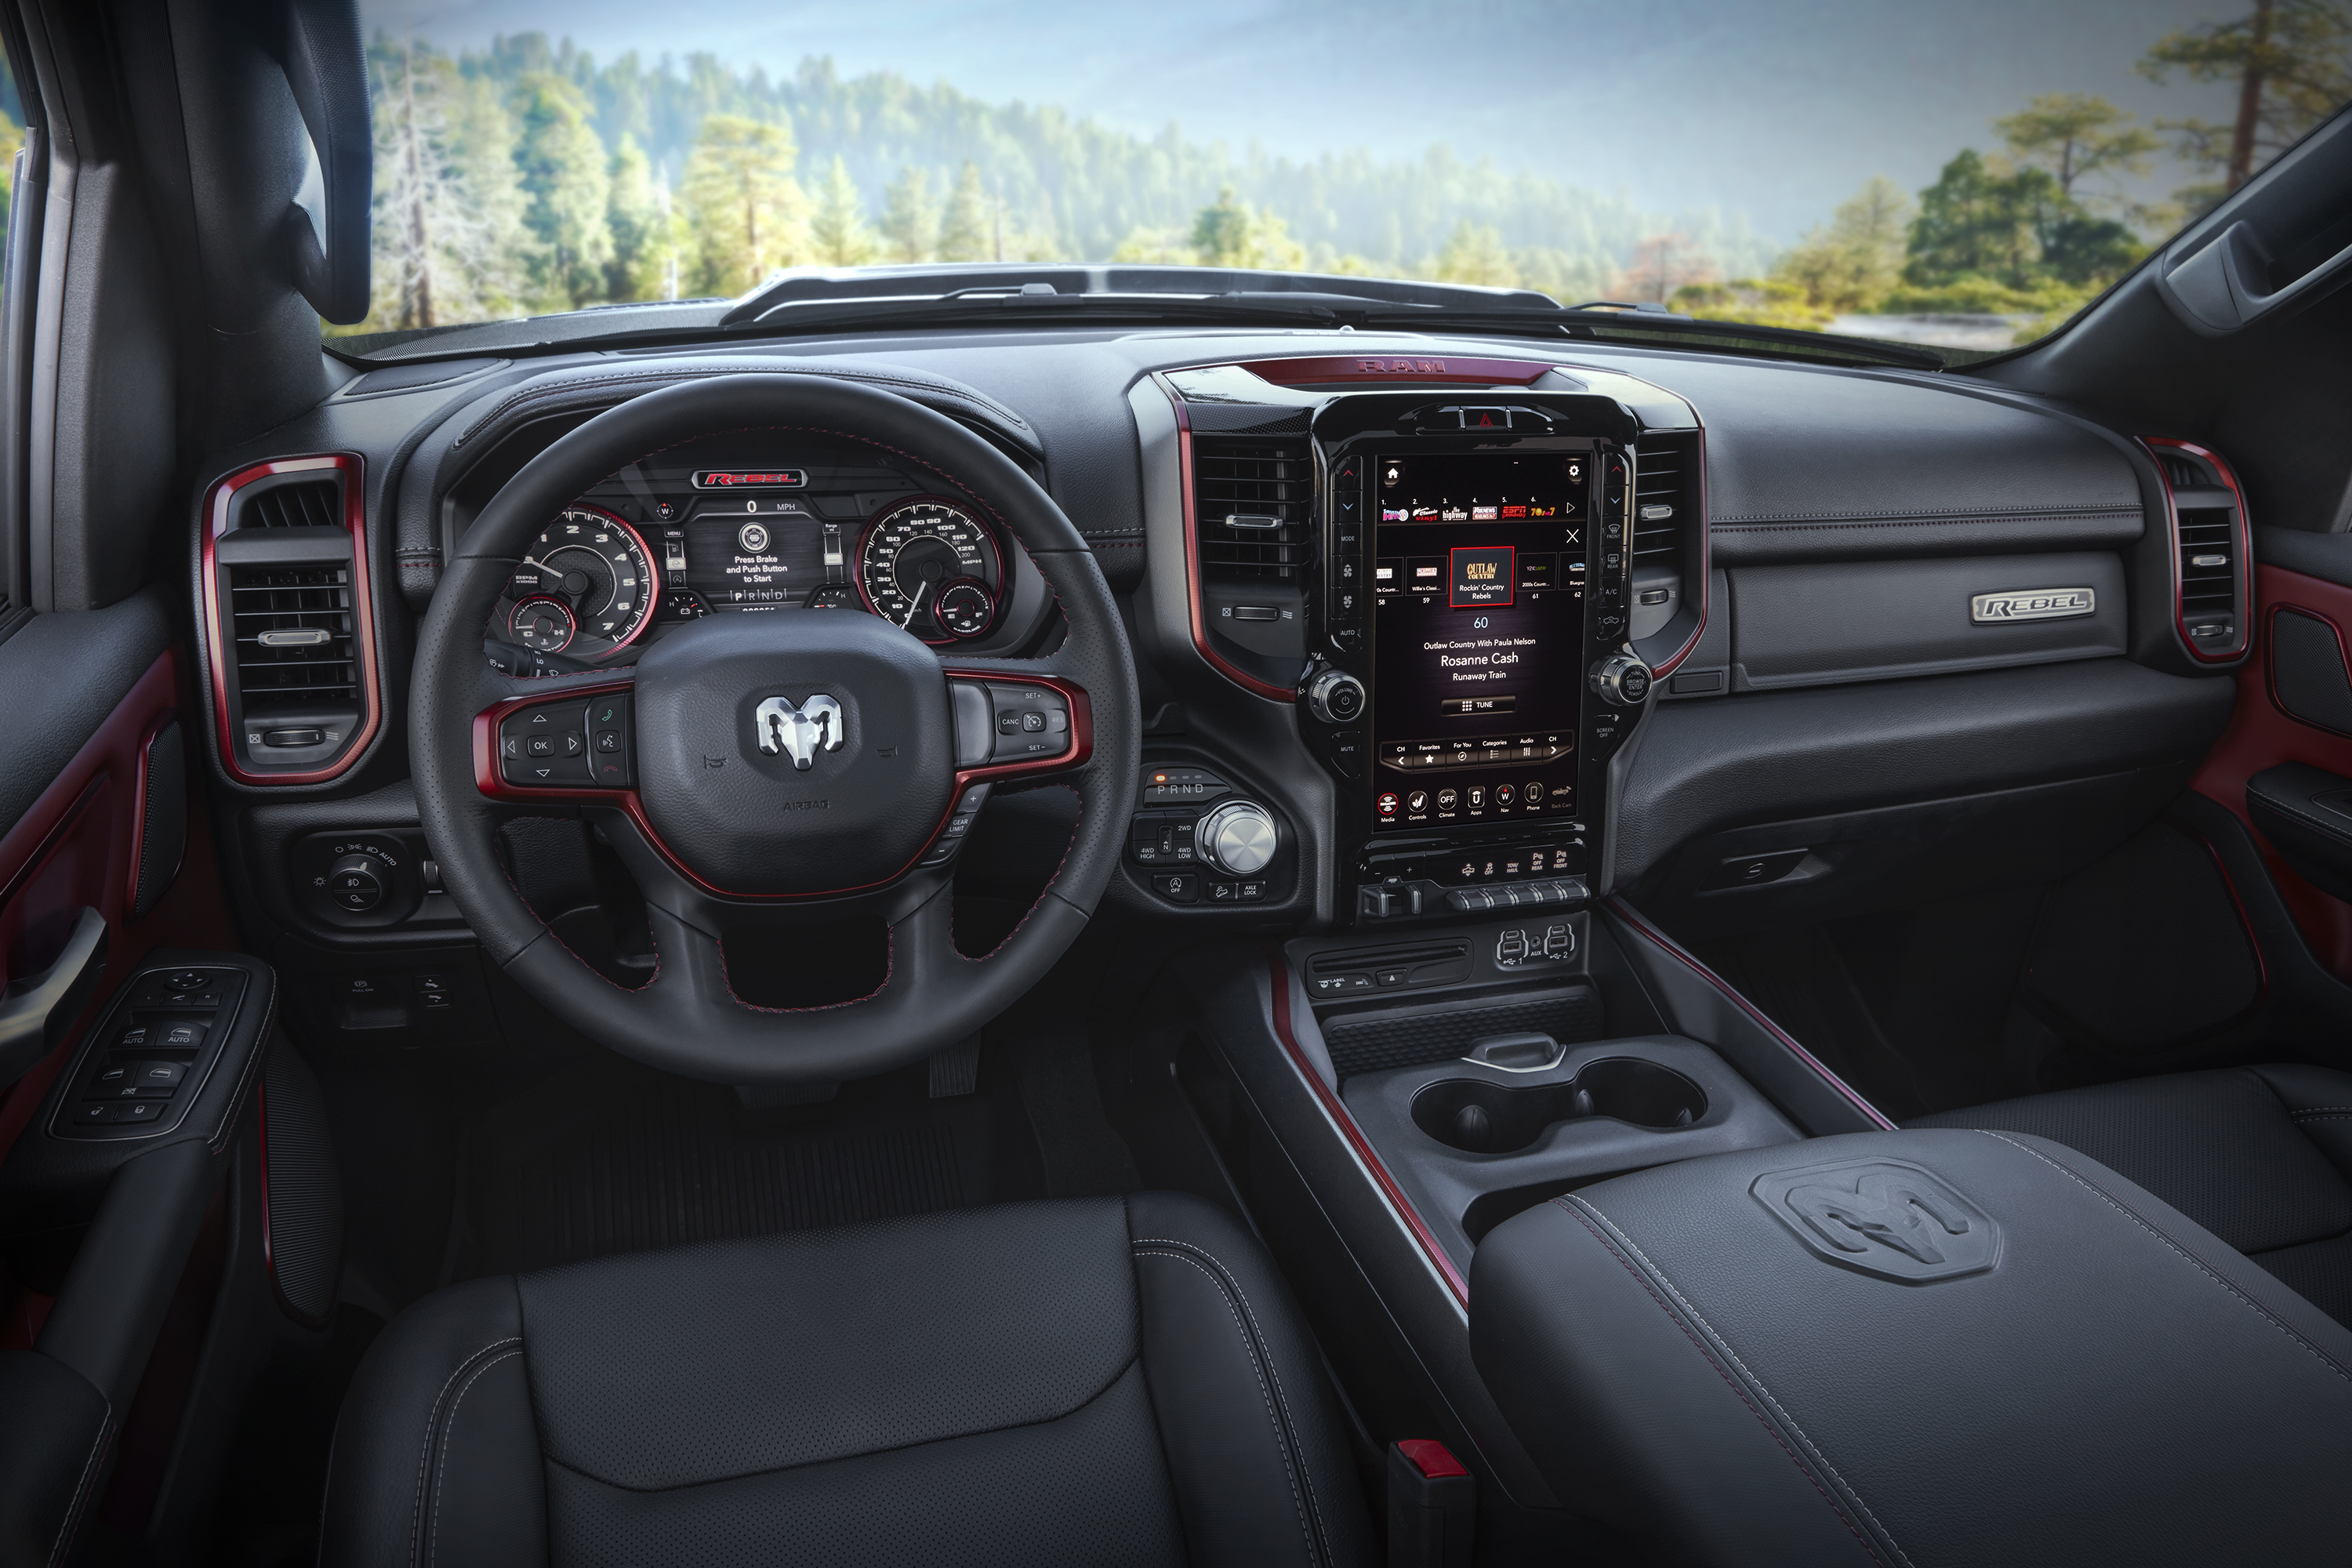 You'll want to interior of the new 2019 Ram 1500 Rebel 12 - Capital